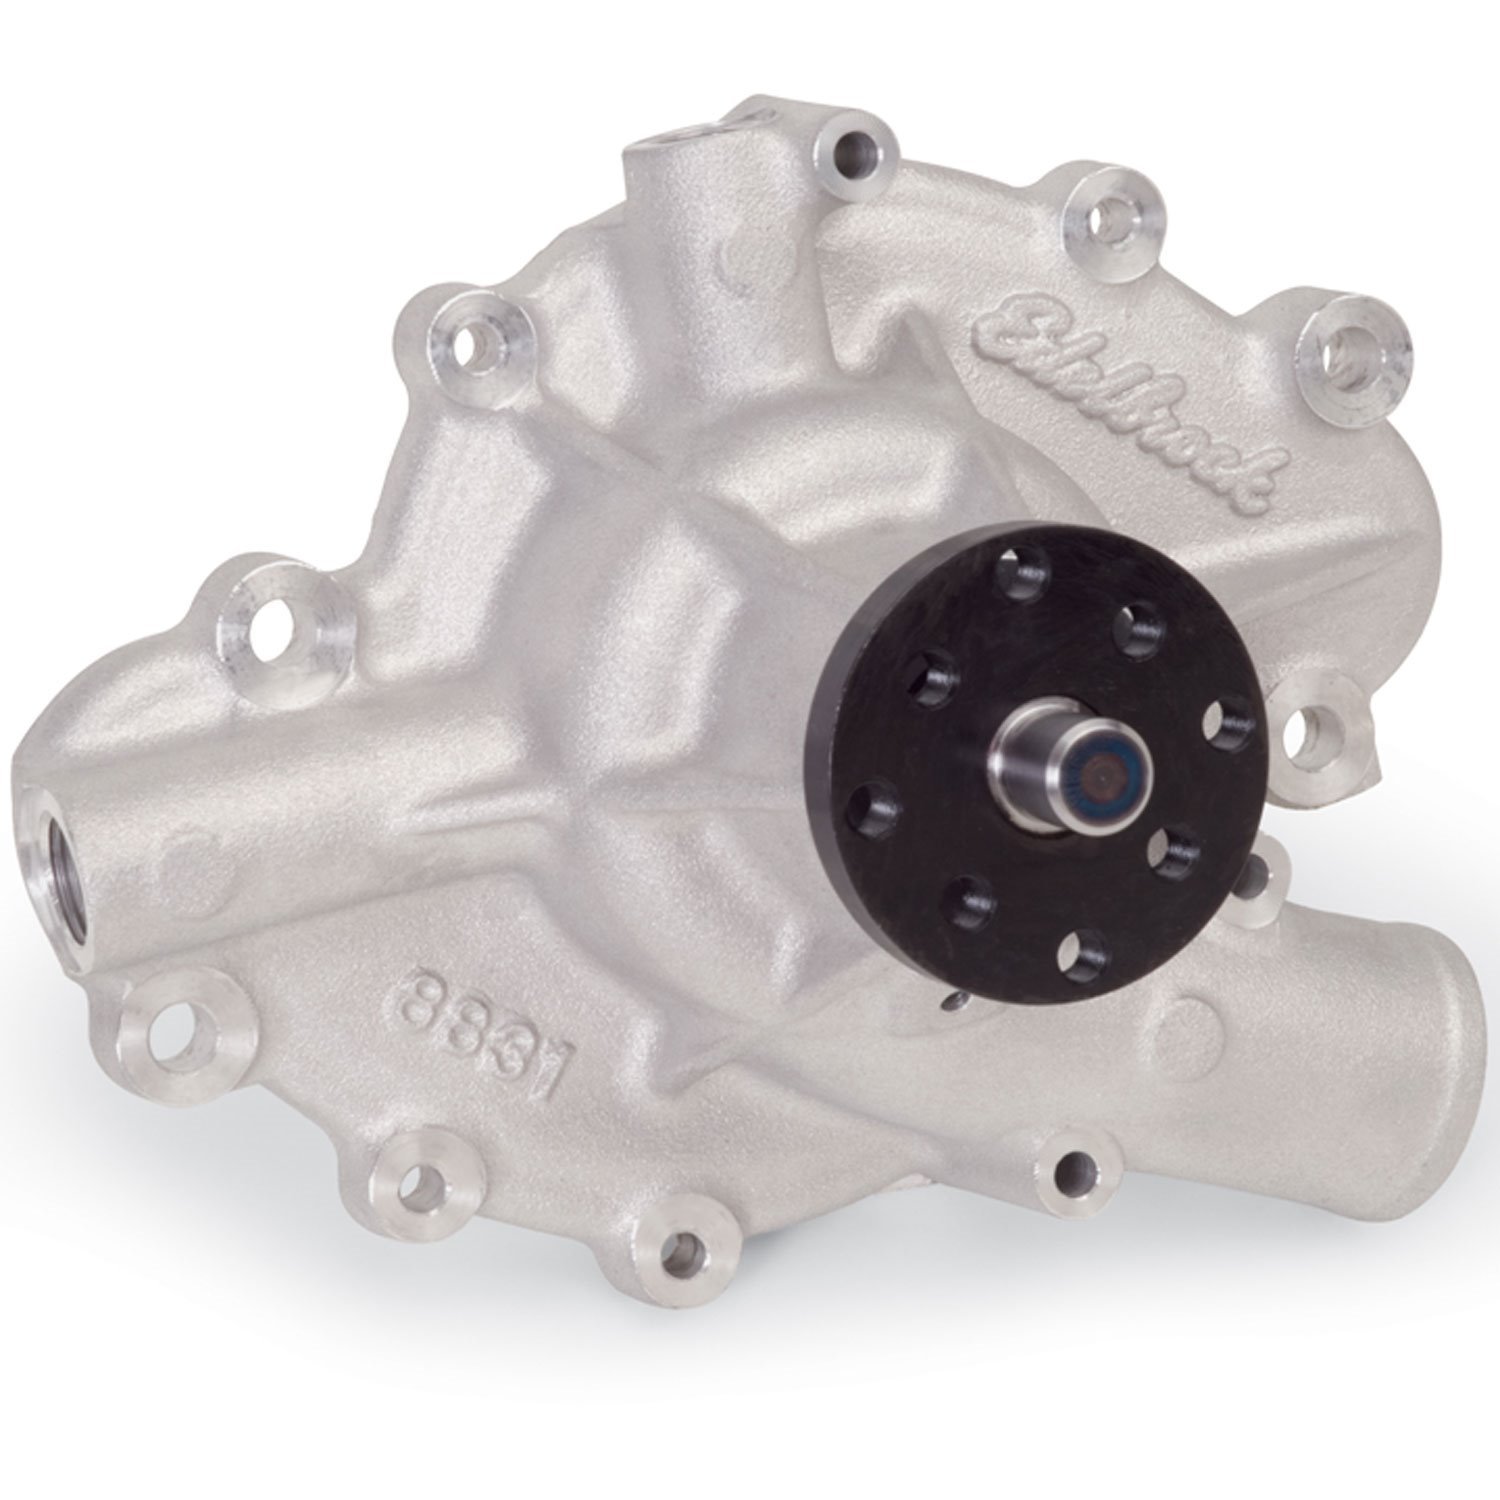 Victor Series Satin Aluminum Water Pump for 1968-1972 AMC 290-401 with Short Style Pump